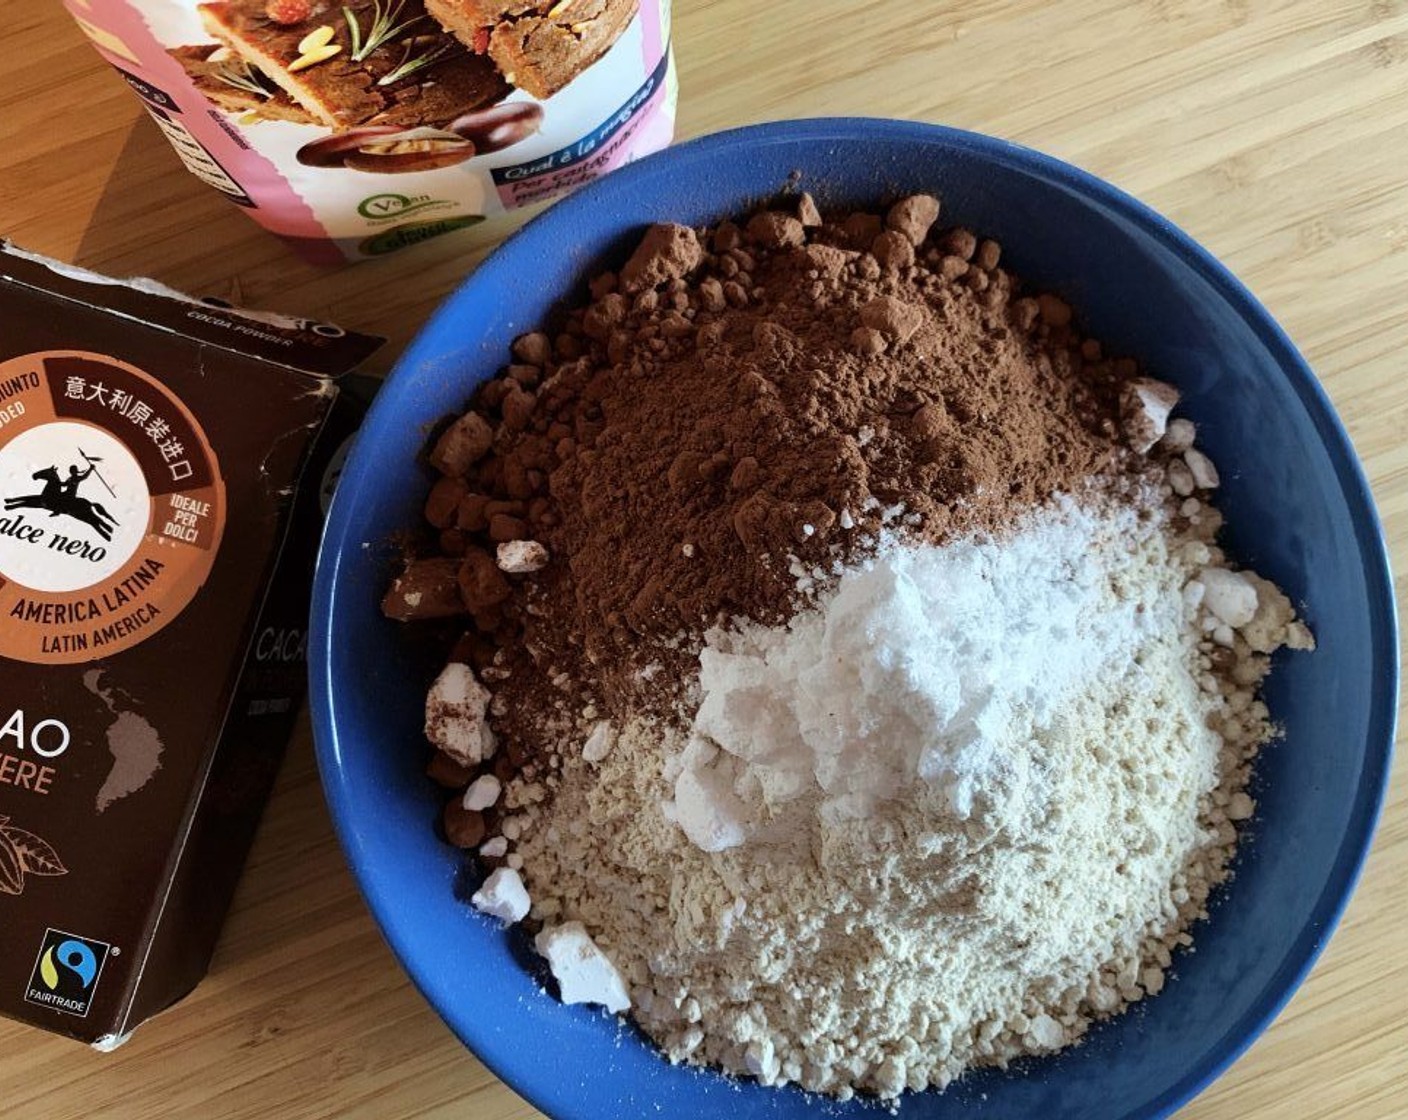 step 4 In a bowl add the Unsweetened Cocoa Powder (1/2 cup), Chestnut Flour (2 1/3 cups), Baking Powder (1 Tbsp) and Salt (1 pinch).